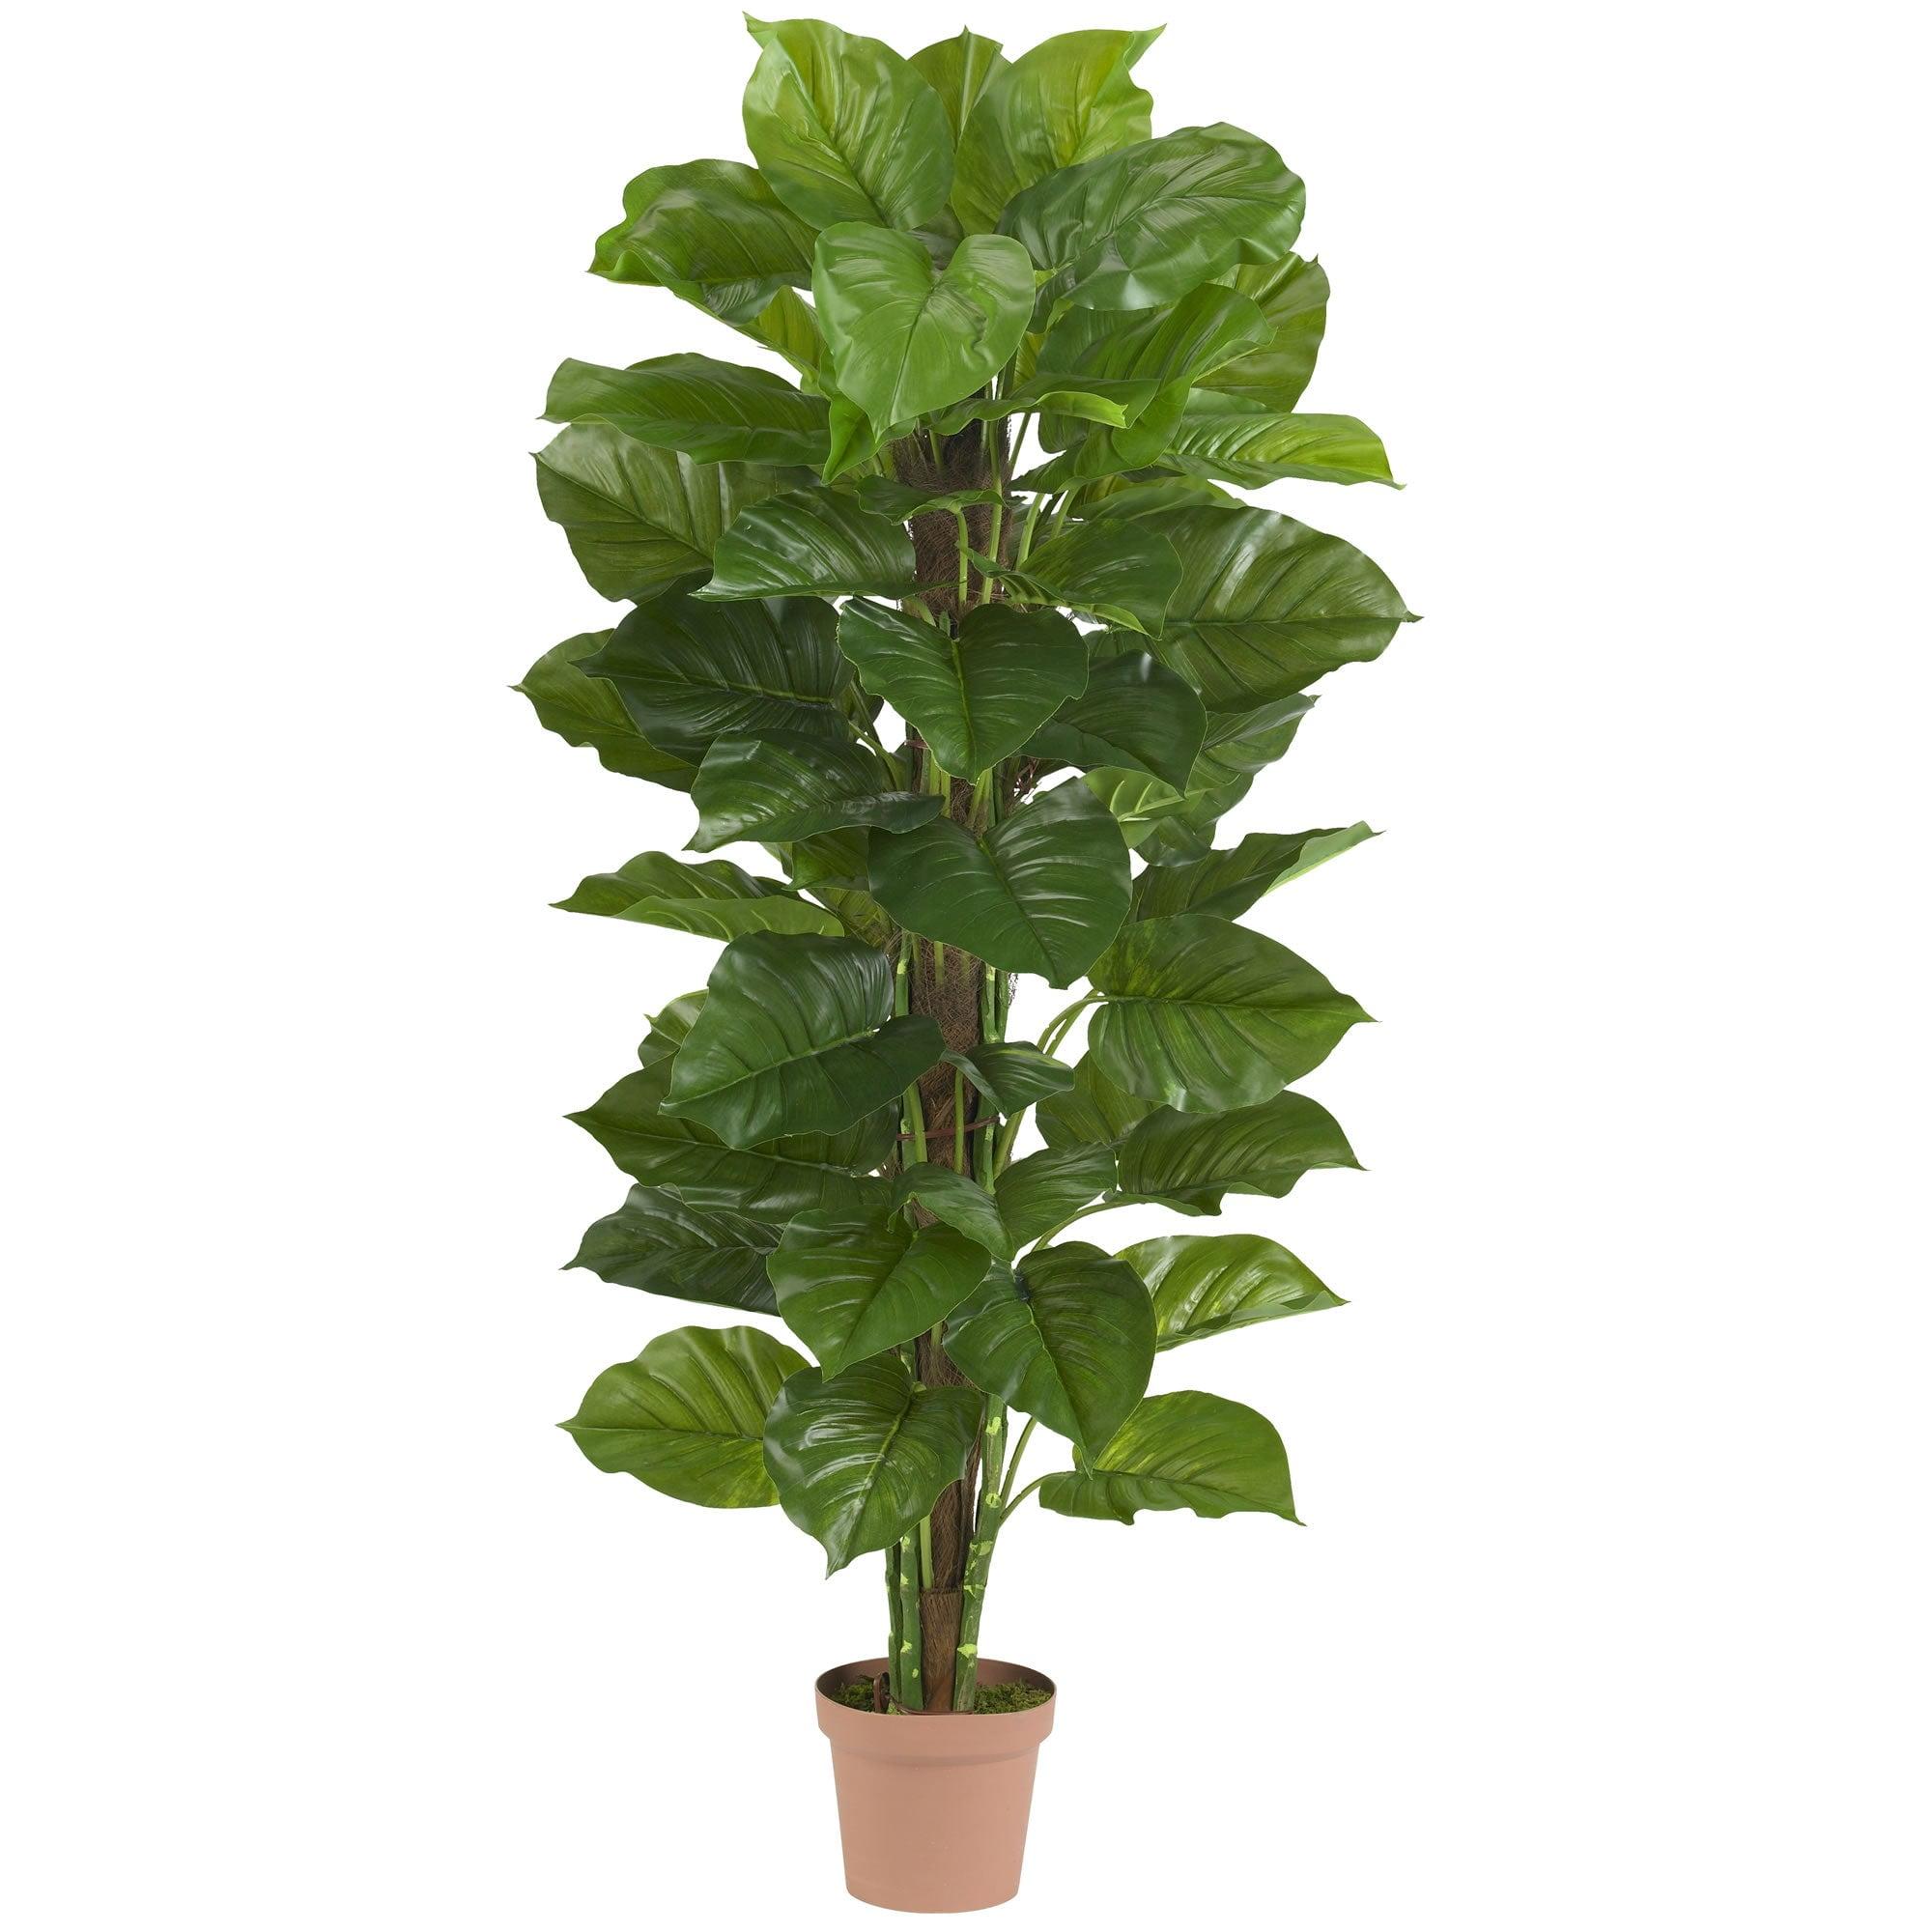 Real Touch Giant Silk Philodendron Floor Plant in Pot - 63"